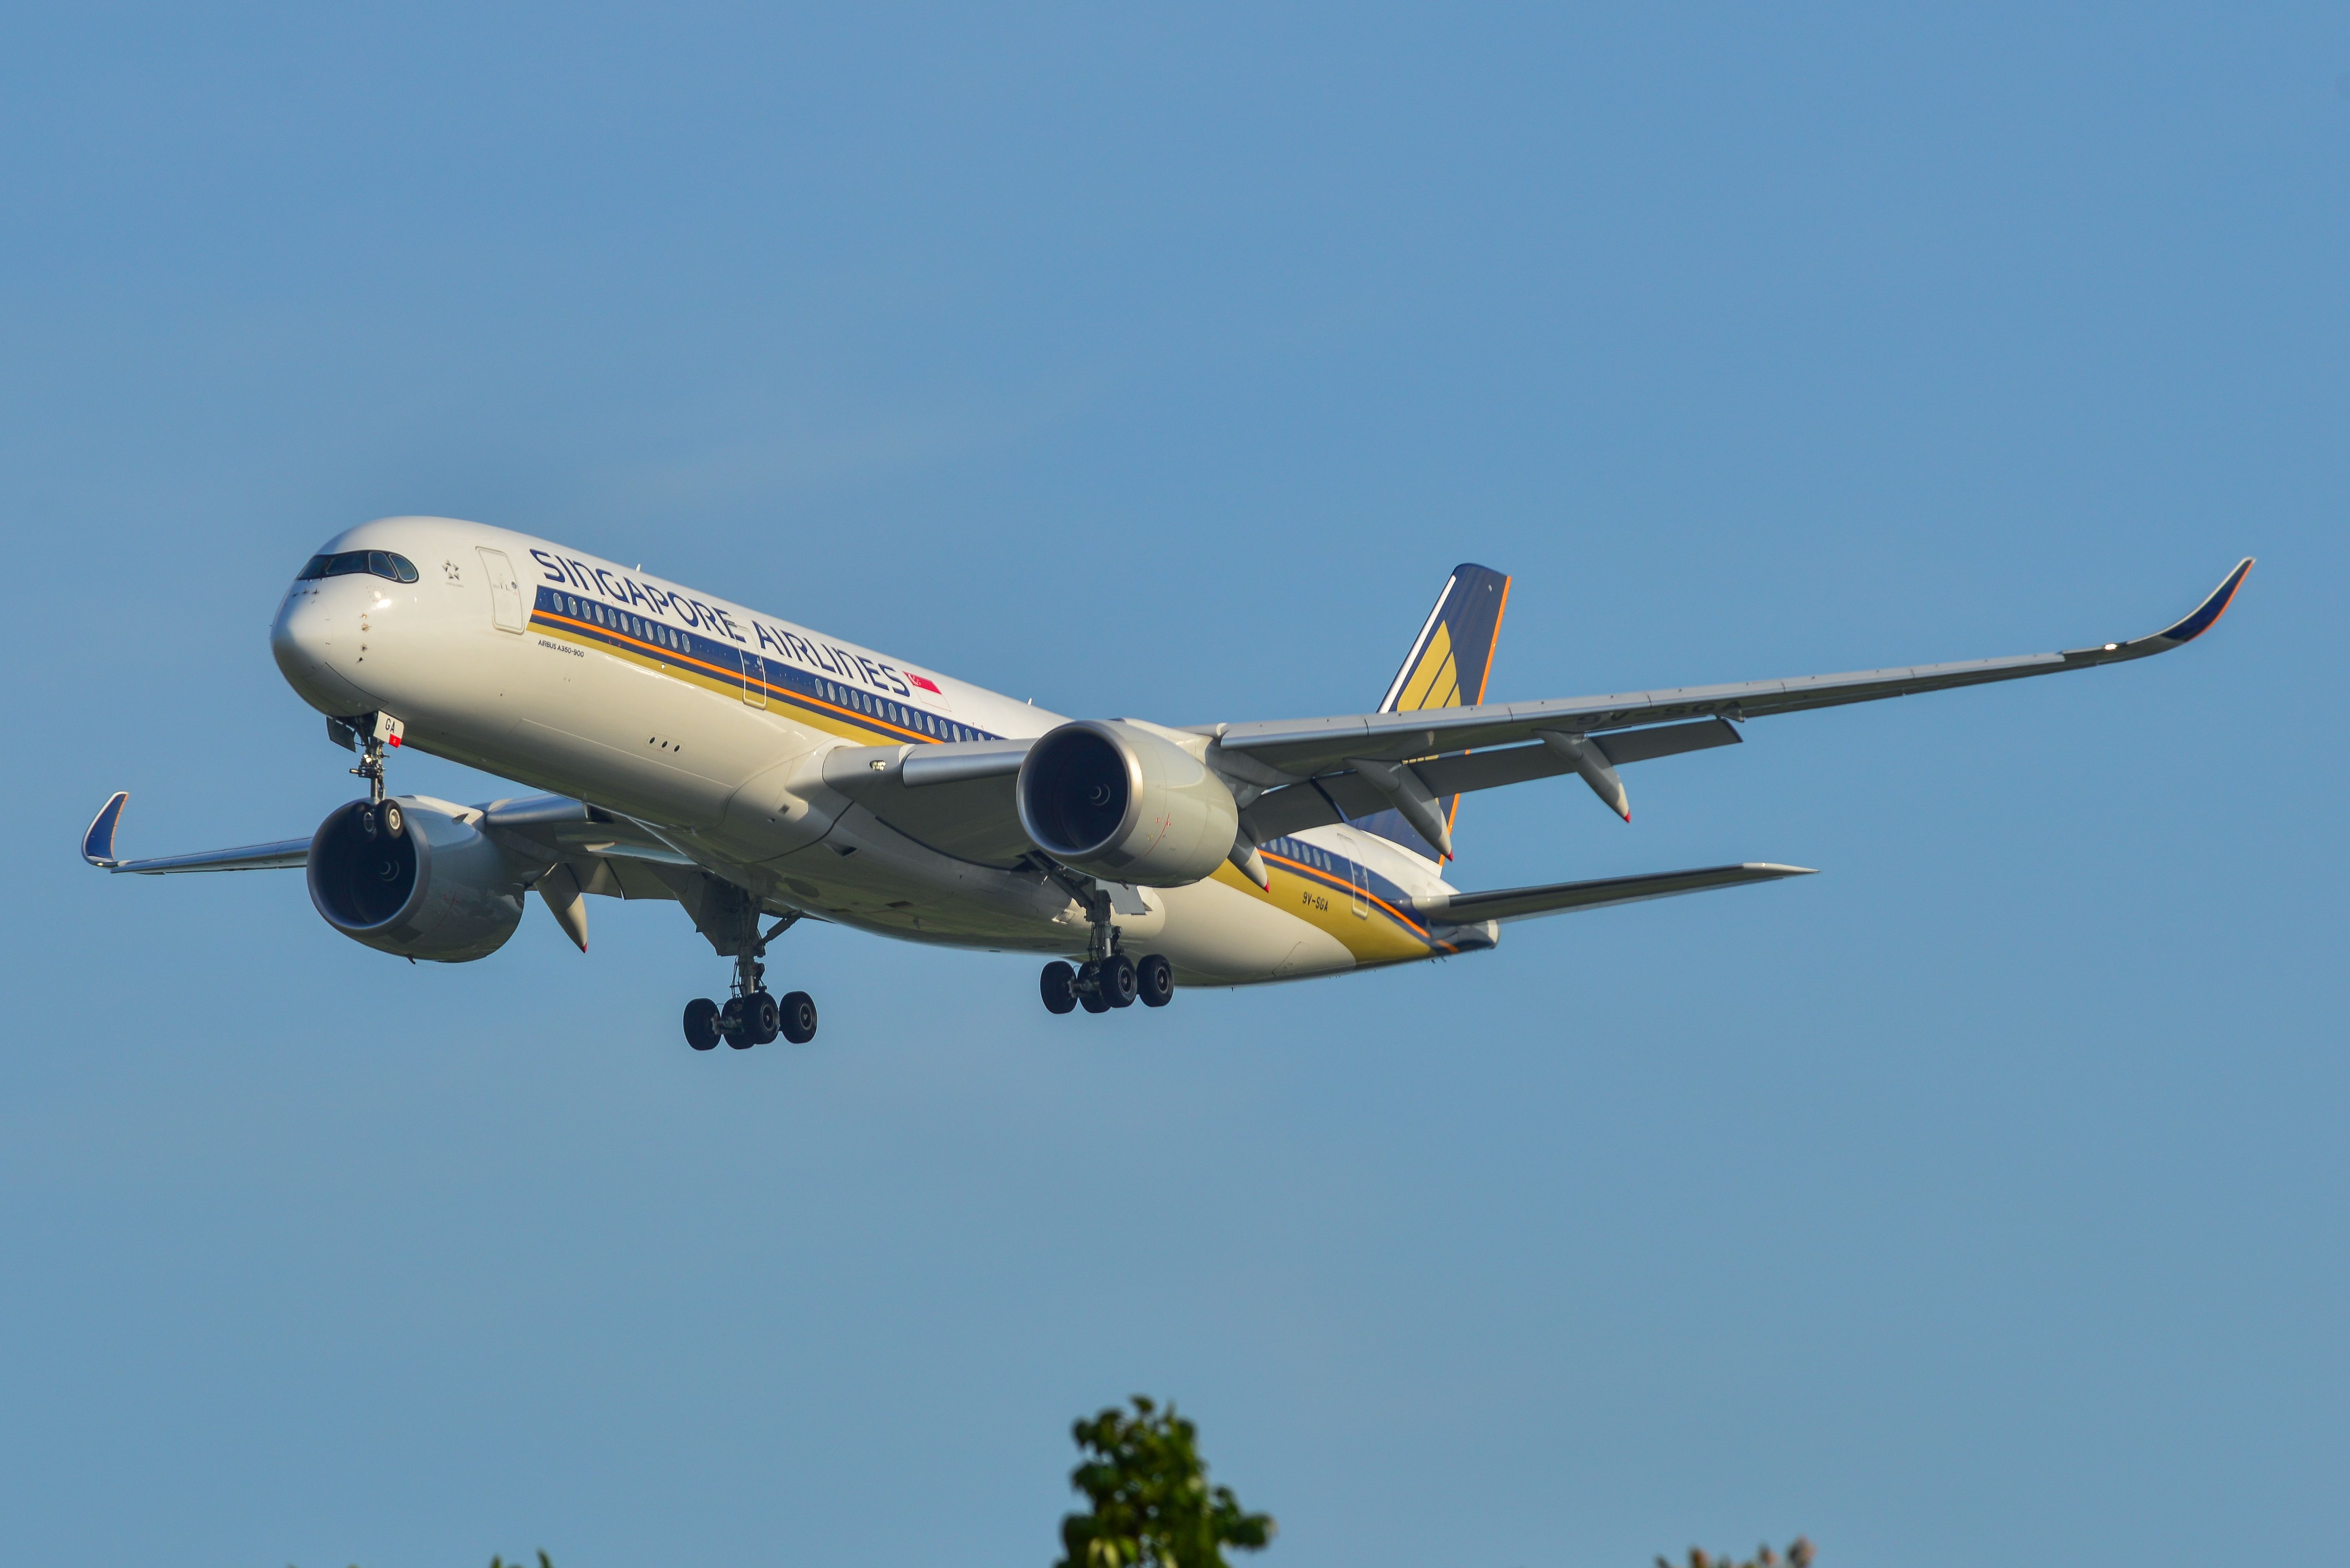 A Singapore Airlines Airbus A350-900ULR flying low to the ground.